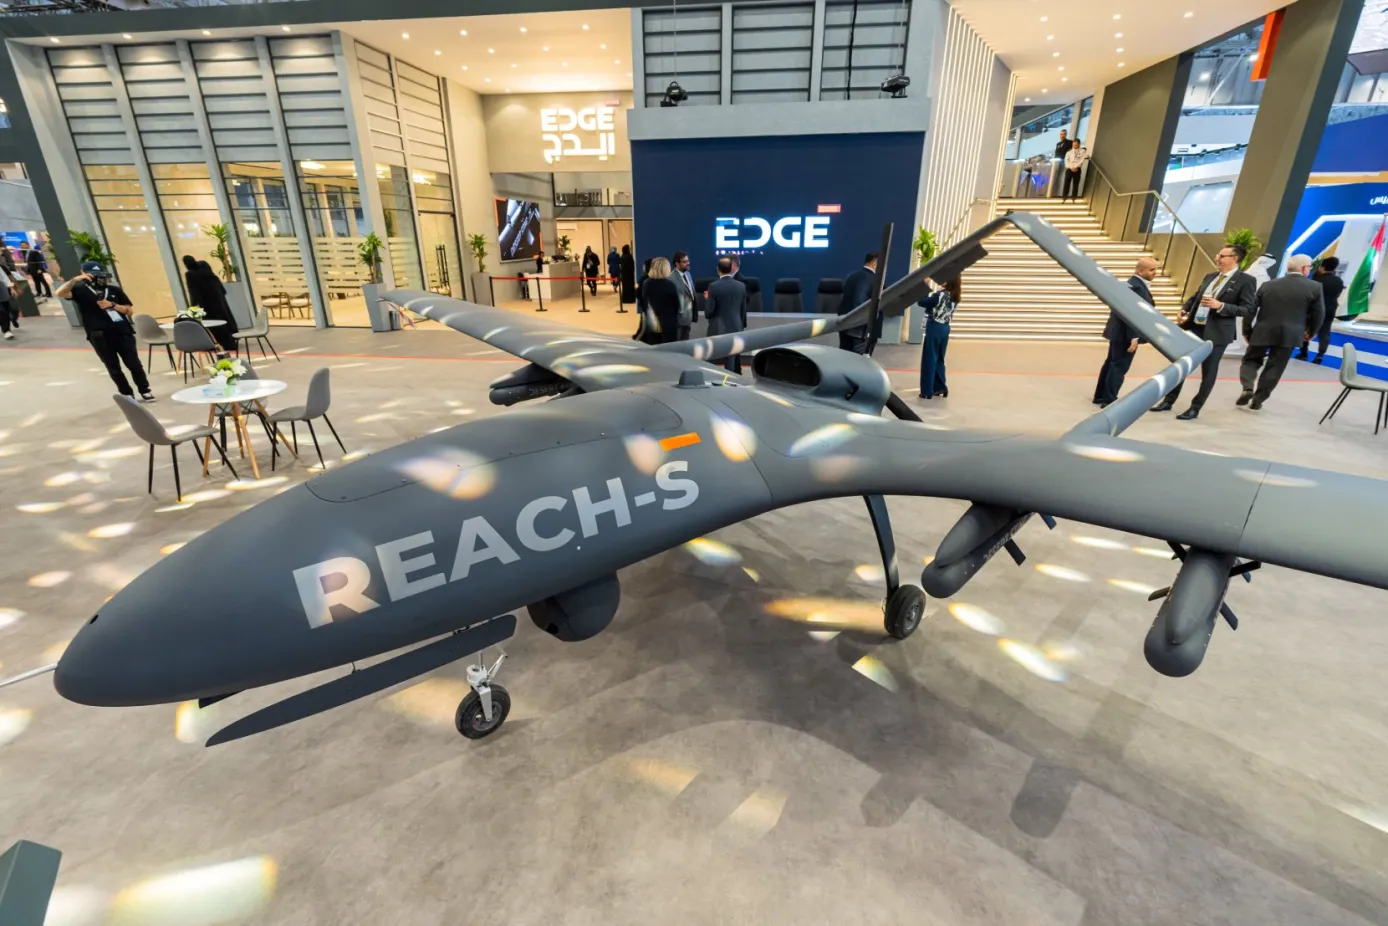  EDGE Receives Order from the UAE Ministry of Defence for 100 REACH-S Unmanned Aircraft 